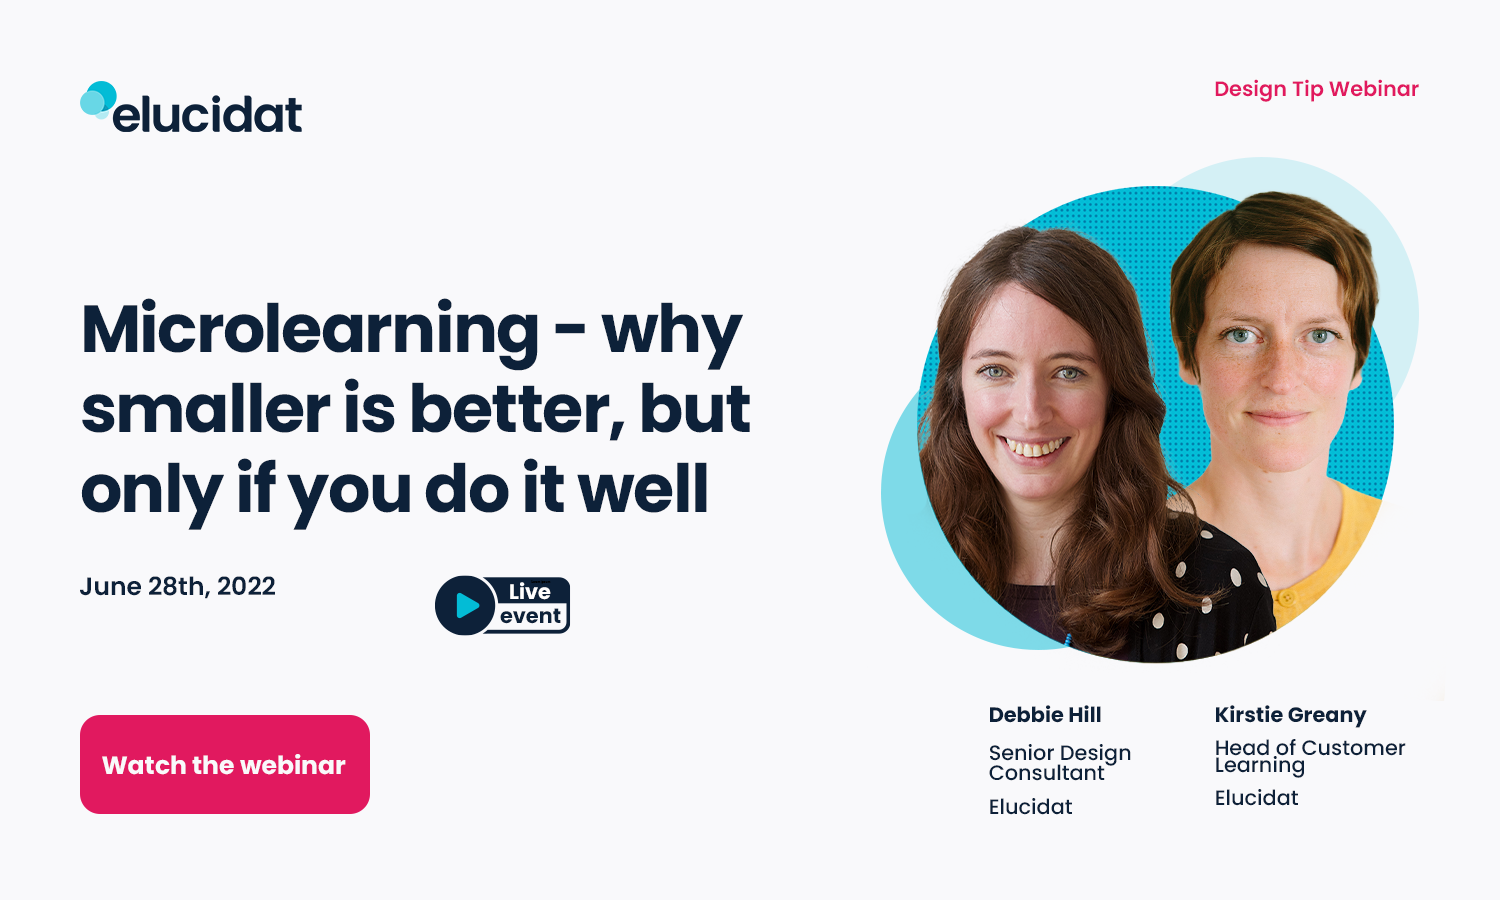 Microlearning why smaller is better webinar